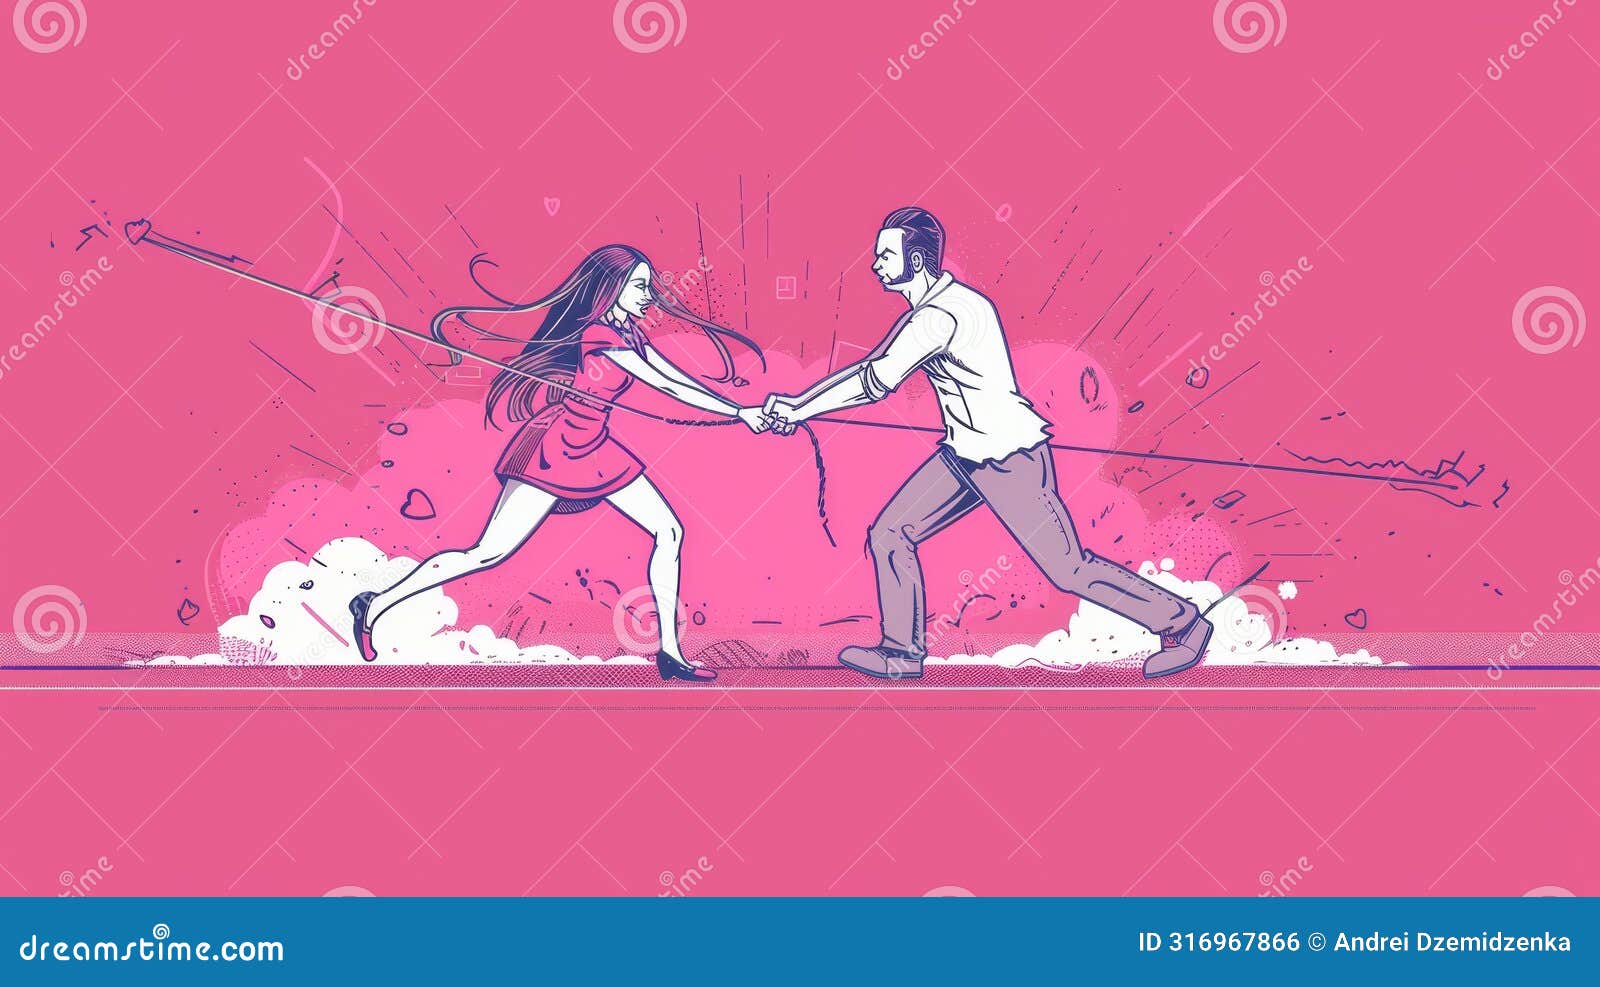 female and male business characters fighting for leadership. concept of feminism and patriarchy, flat modern